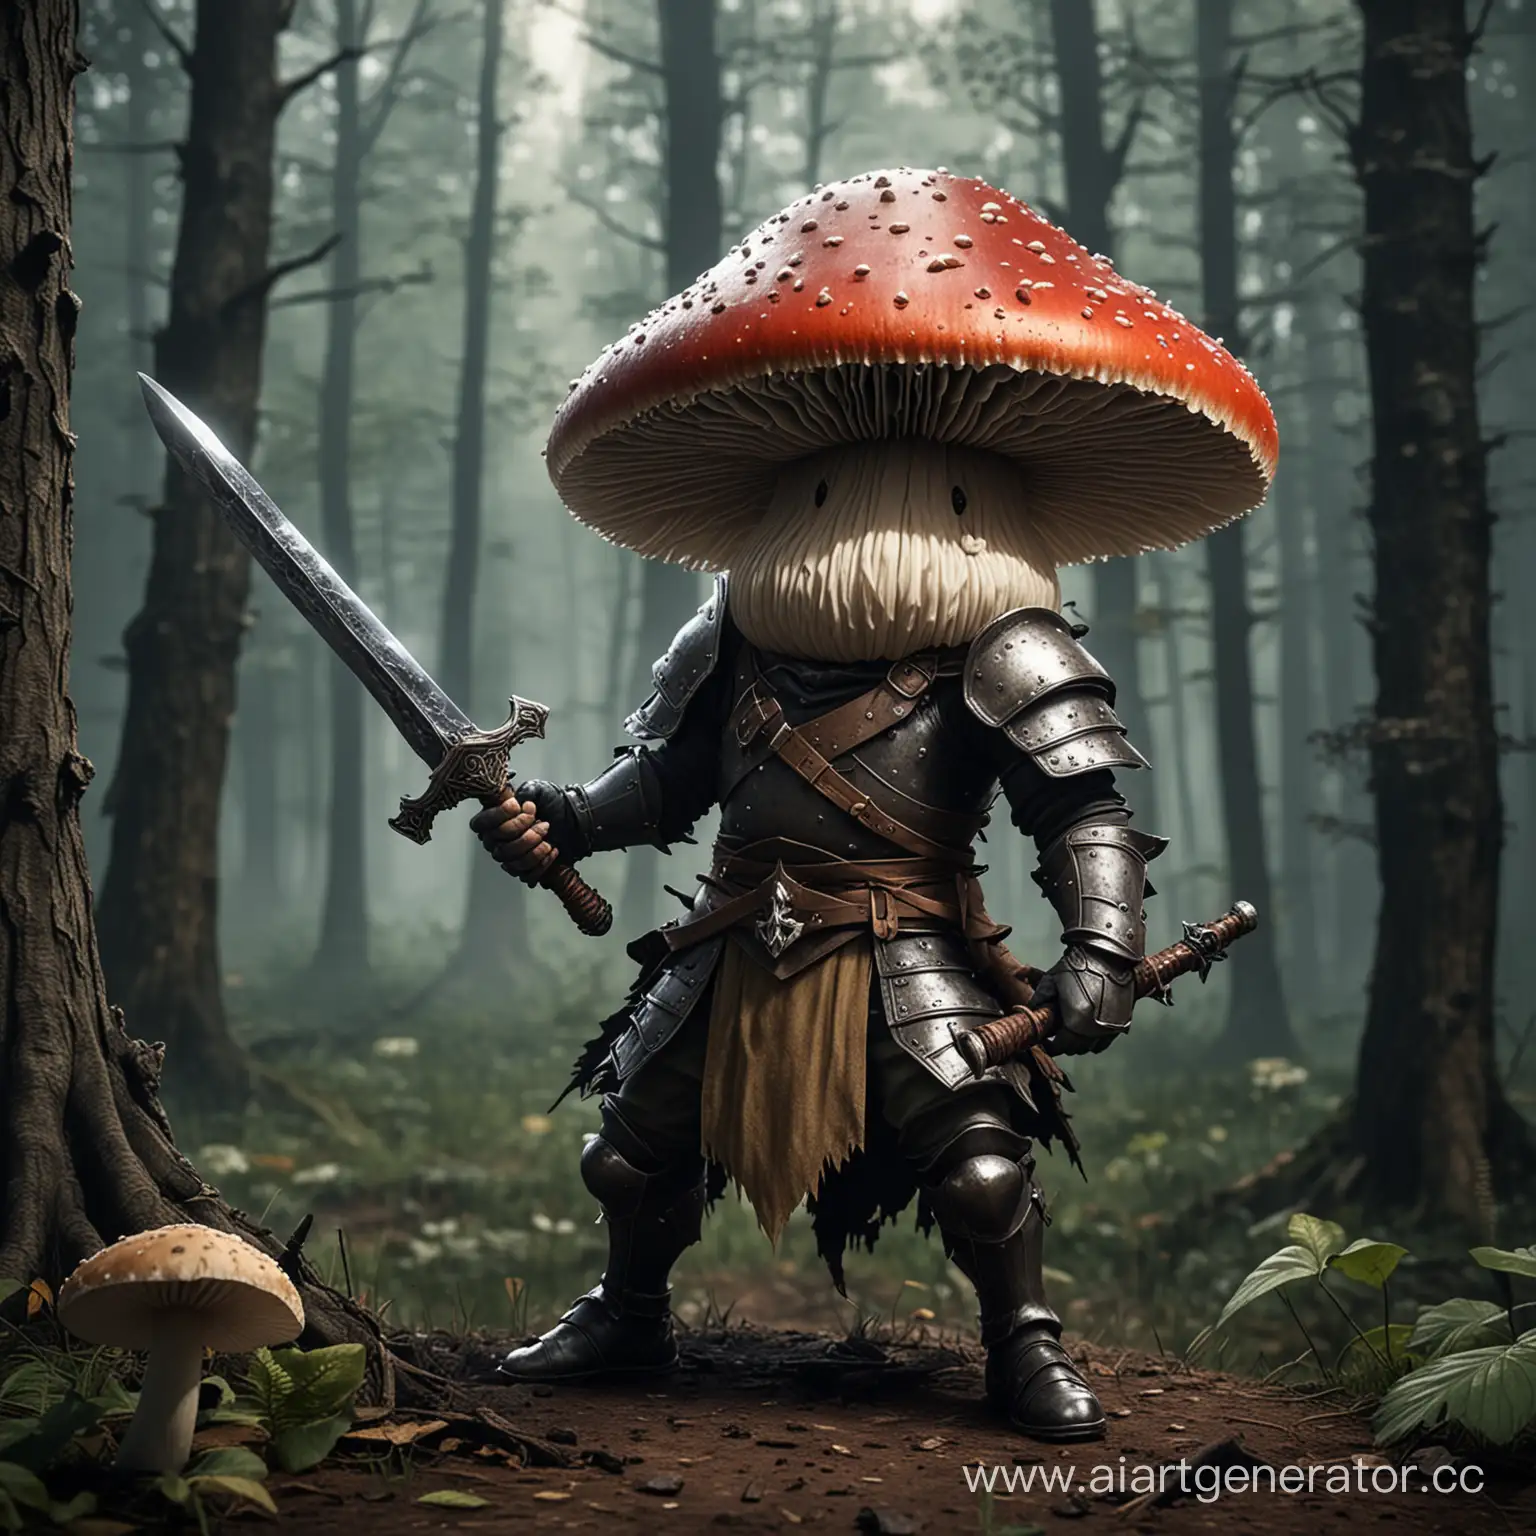 Mushroom-Warrior-Defends-Forest-Against-Evil-Fungi-with-Sword